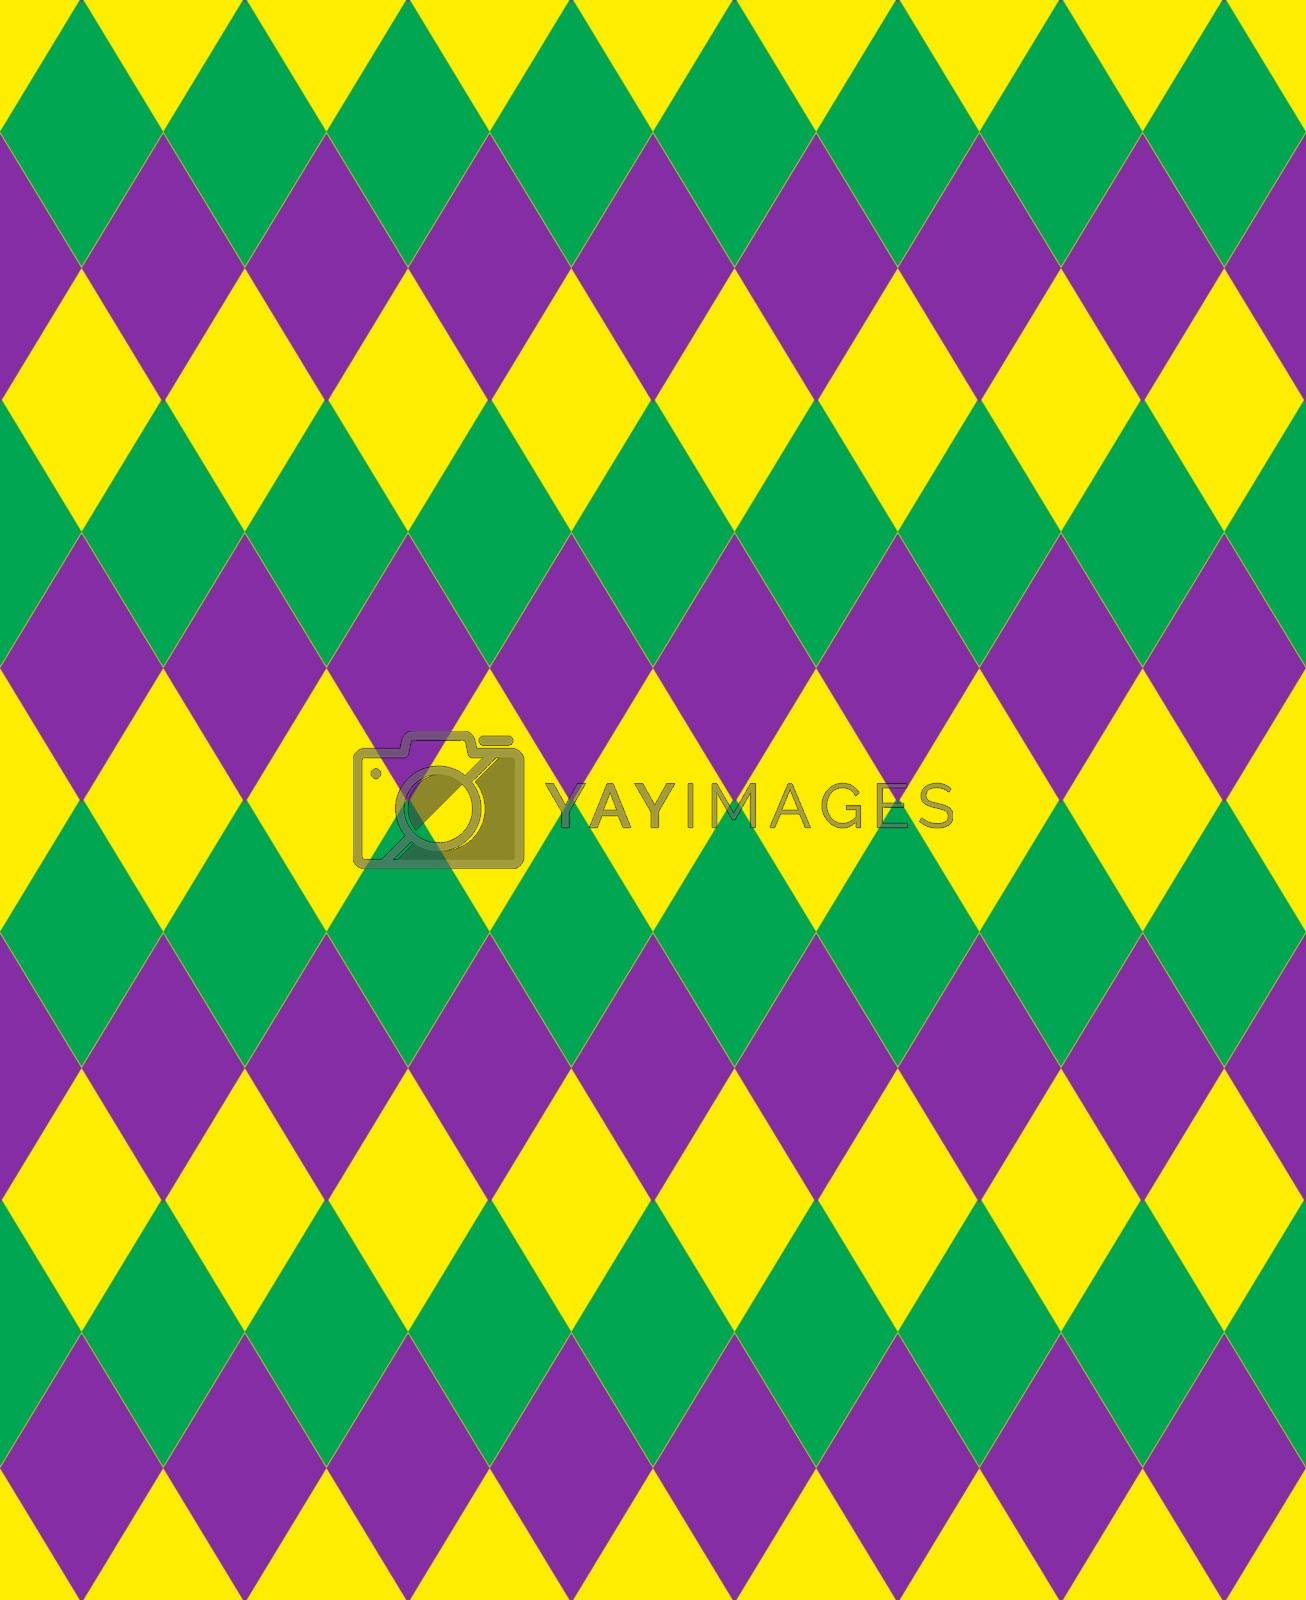 Royalty free image of Mardi Gras abstract geometric pattern. Purple, yellow, green rhombus repeating texture. Endless background, wallpaper, backdrop. Vector illustration. by lucia_fox